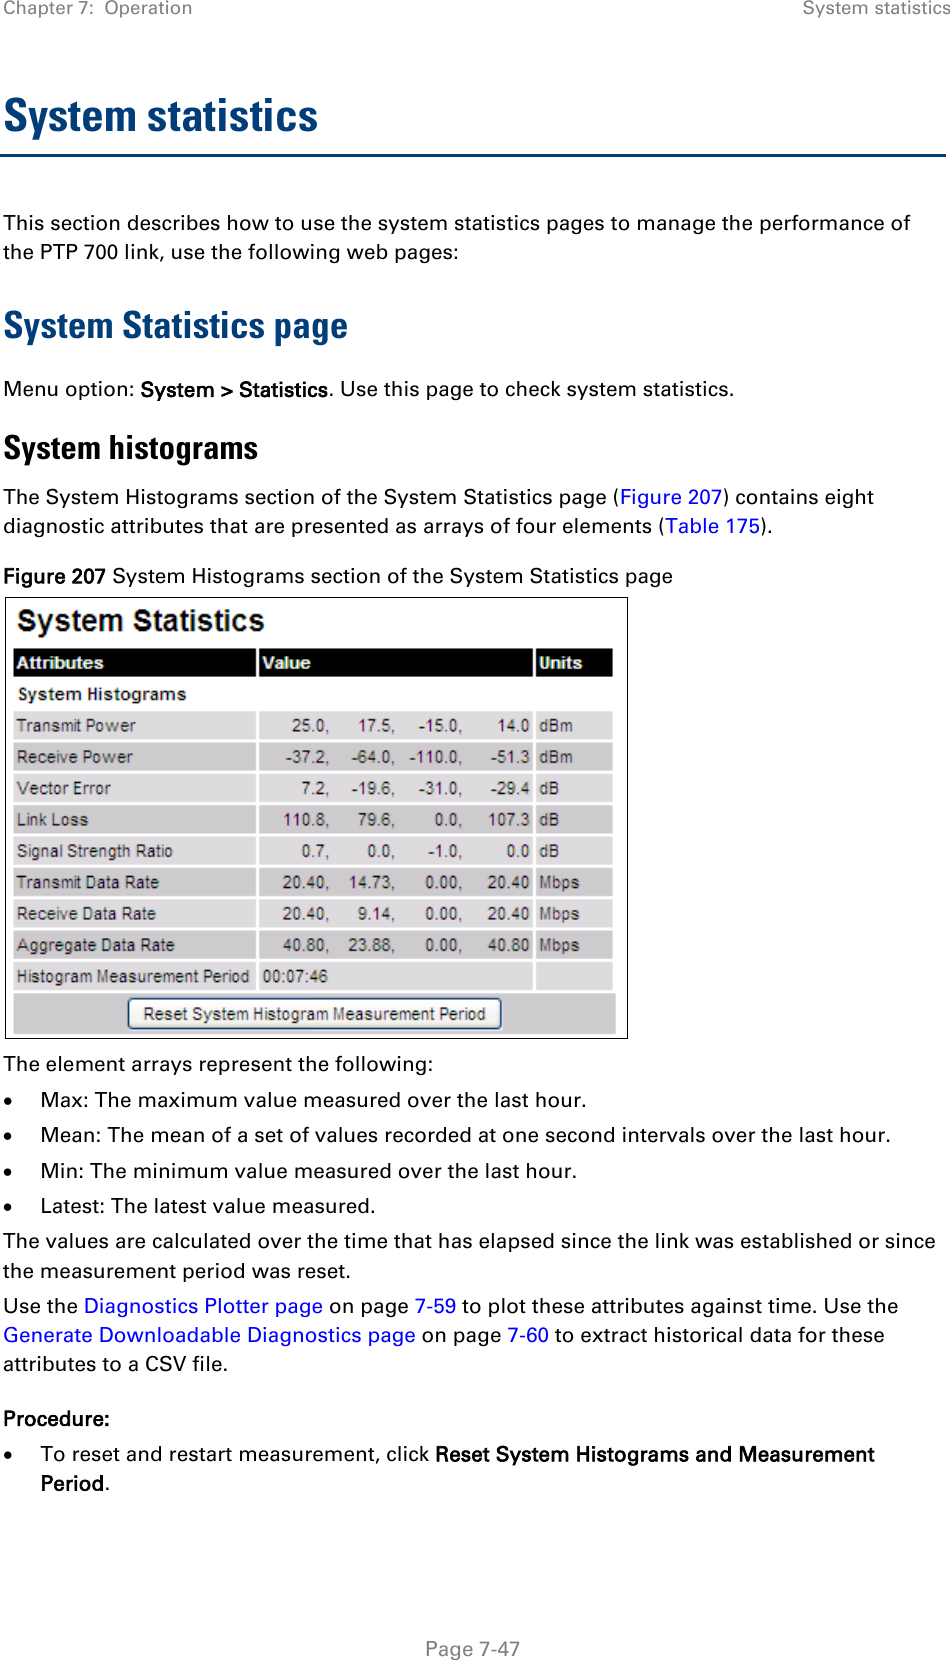 Chapter 7:  Operation System statistics  System statistics This section describes how to use the system statistics pages to manage the performance of the PTP 700 link, use the following web pages: System Statistics page Menu option: System &gt; Statistics. Use this page to check system statistics.  System histograms The System Histograms section of the System Statistics page (Figure 207) contains eight diagnostic attributes that are presented as arrays of four elements (Table 175). Figure 207 System Histograms section of the System Statistics page  The element arrays represent the following: • Max: The maximum value measured over the last hour. • Mean: The mean of a set of values recorded at one second intervals over the last hour. • Min: The minimum value measured over the last hour. • Latest: The latest value measured.  The values are calculated over the time that has elapsed since the link was established or since the measurement period was reset. Use the Diagnostics Plotter page on page 7-59 to plot these attributes against time. Use the Generate Downloadable Diagnostics page on page 7-60 to extract historical data for these attributes to a CSV file. Procedure: • To reset and restart measurement, click Reset System Histograms and Measurement Period.    Page 7-47 